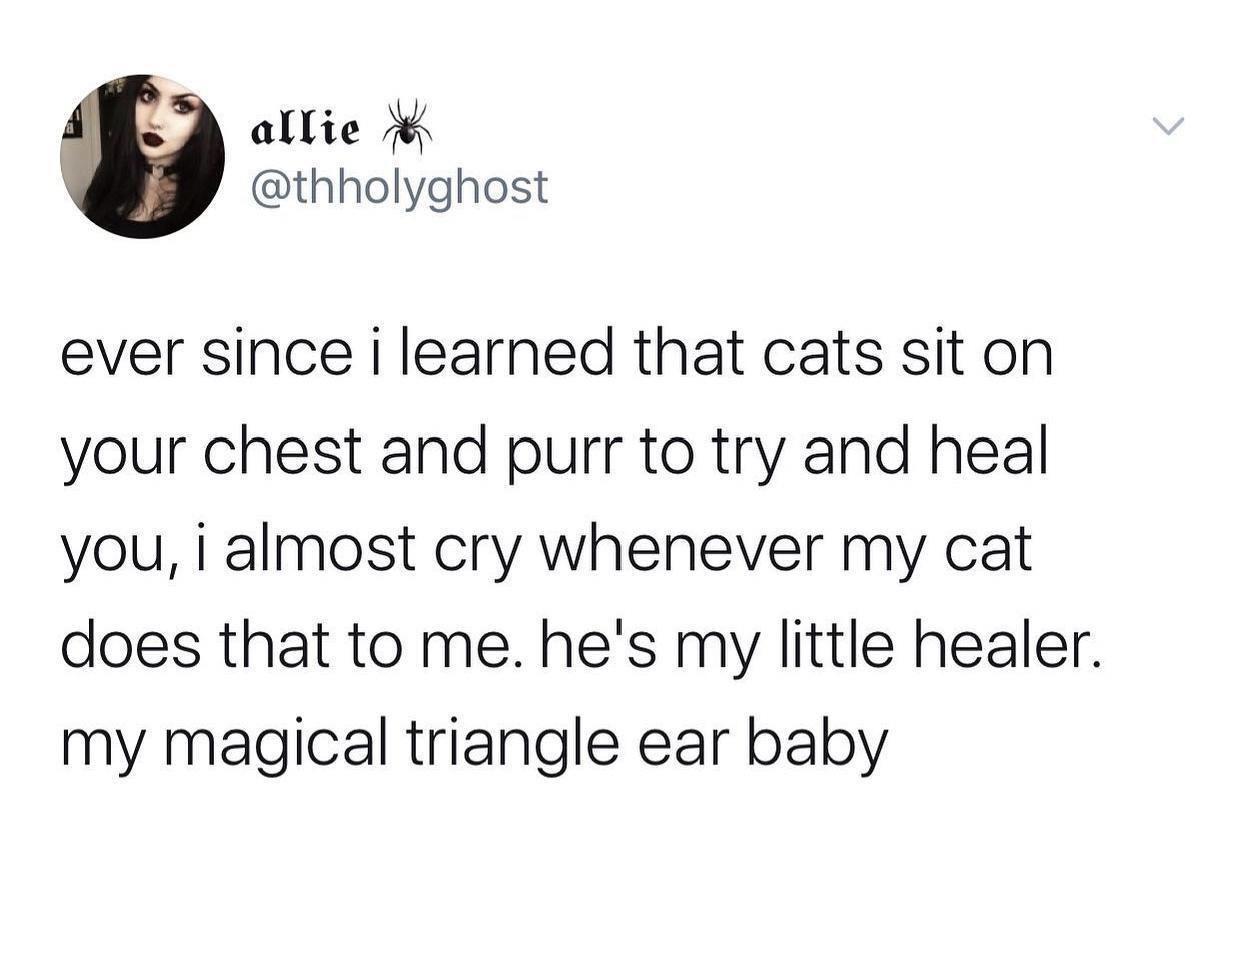 cats+sit+on+your+chest+to+heal+you